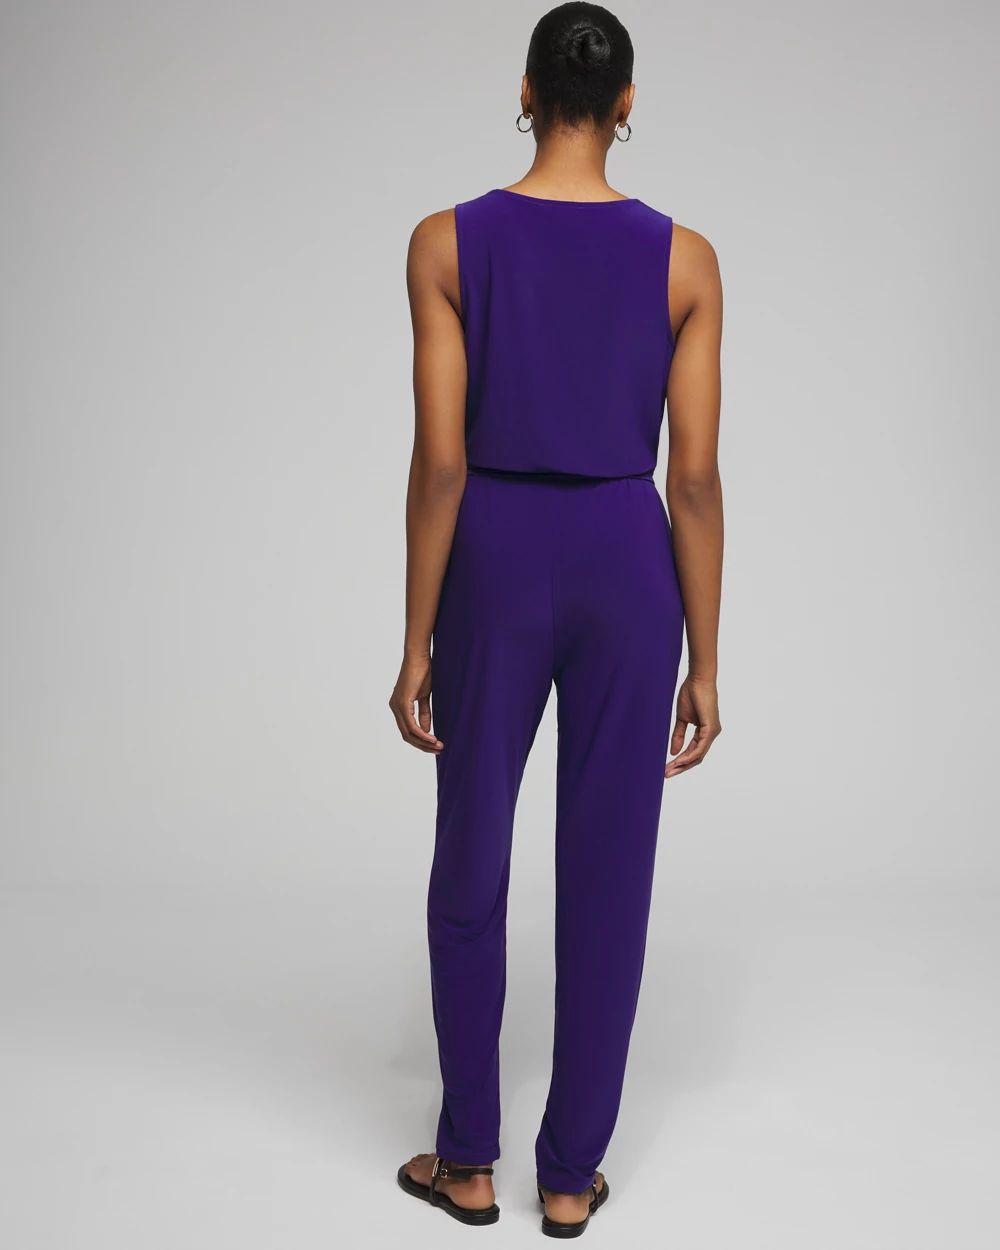 Outlet WHBM Sleeveless Tapered Leg Jumpsuit click to view larger image.